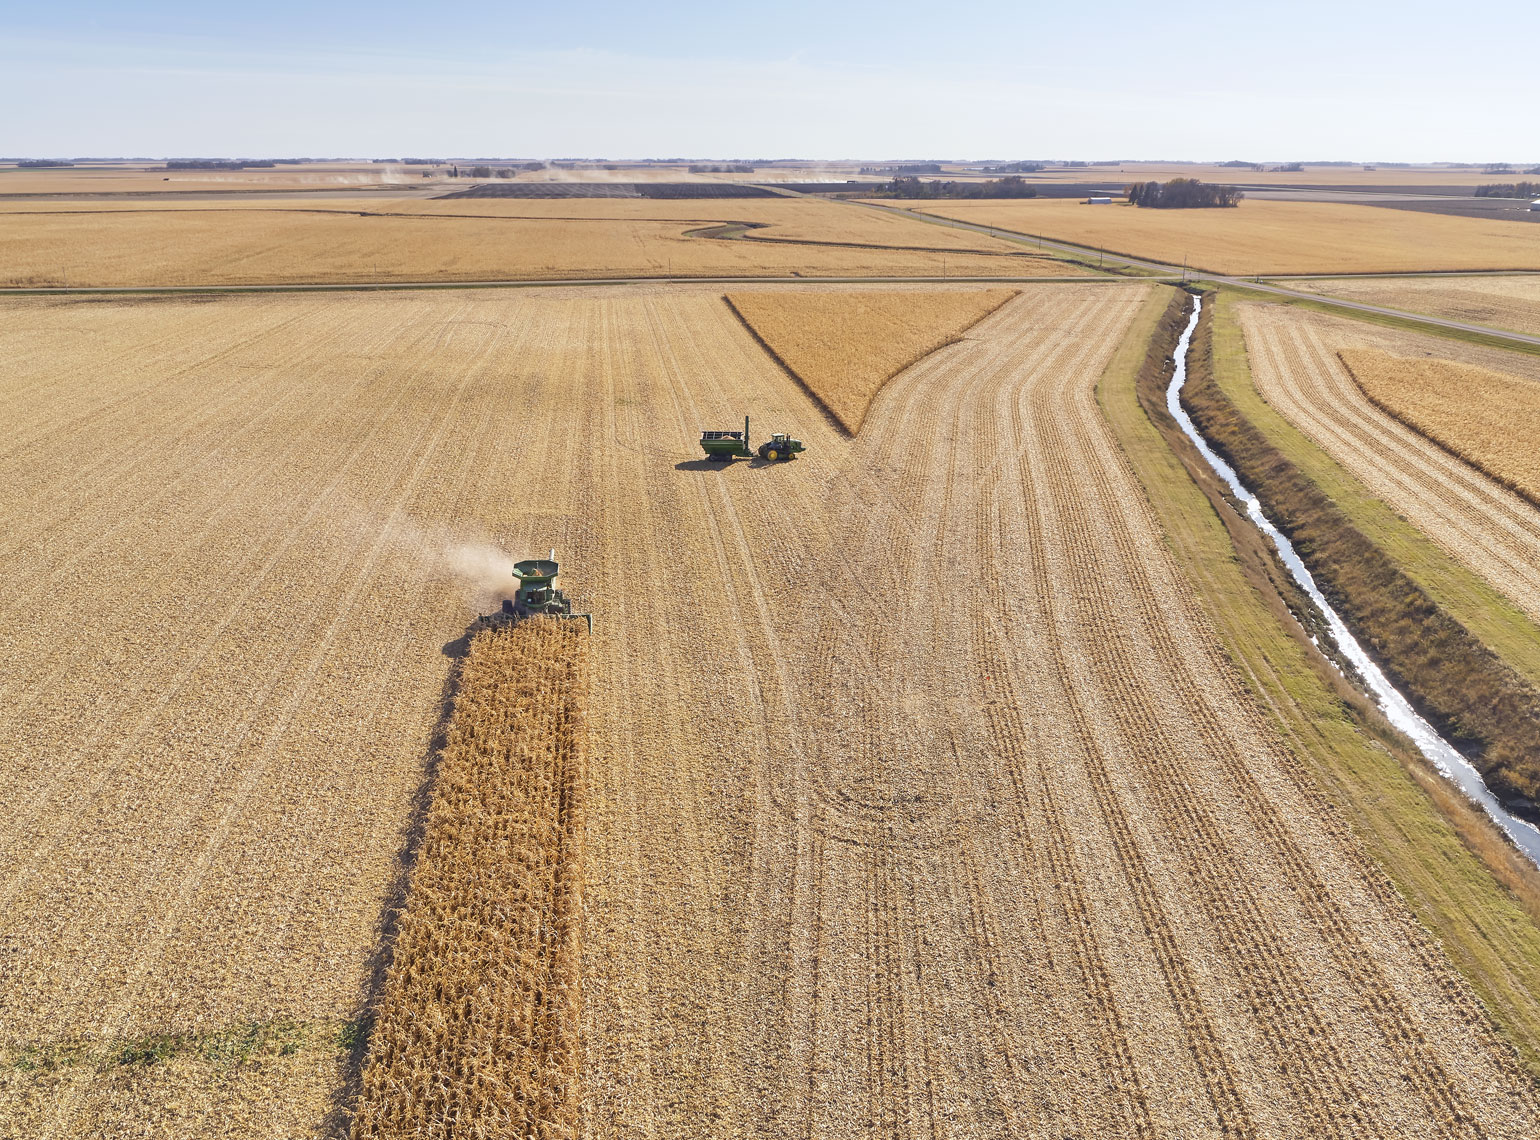 Drone/agricultural photography/farm equipment/InsideOut Studios